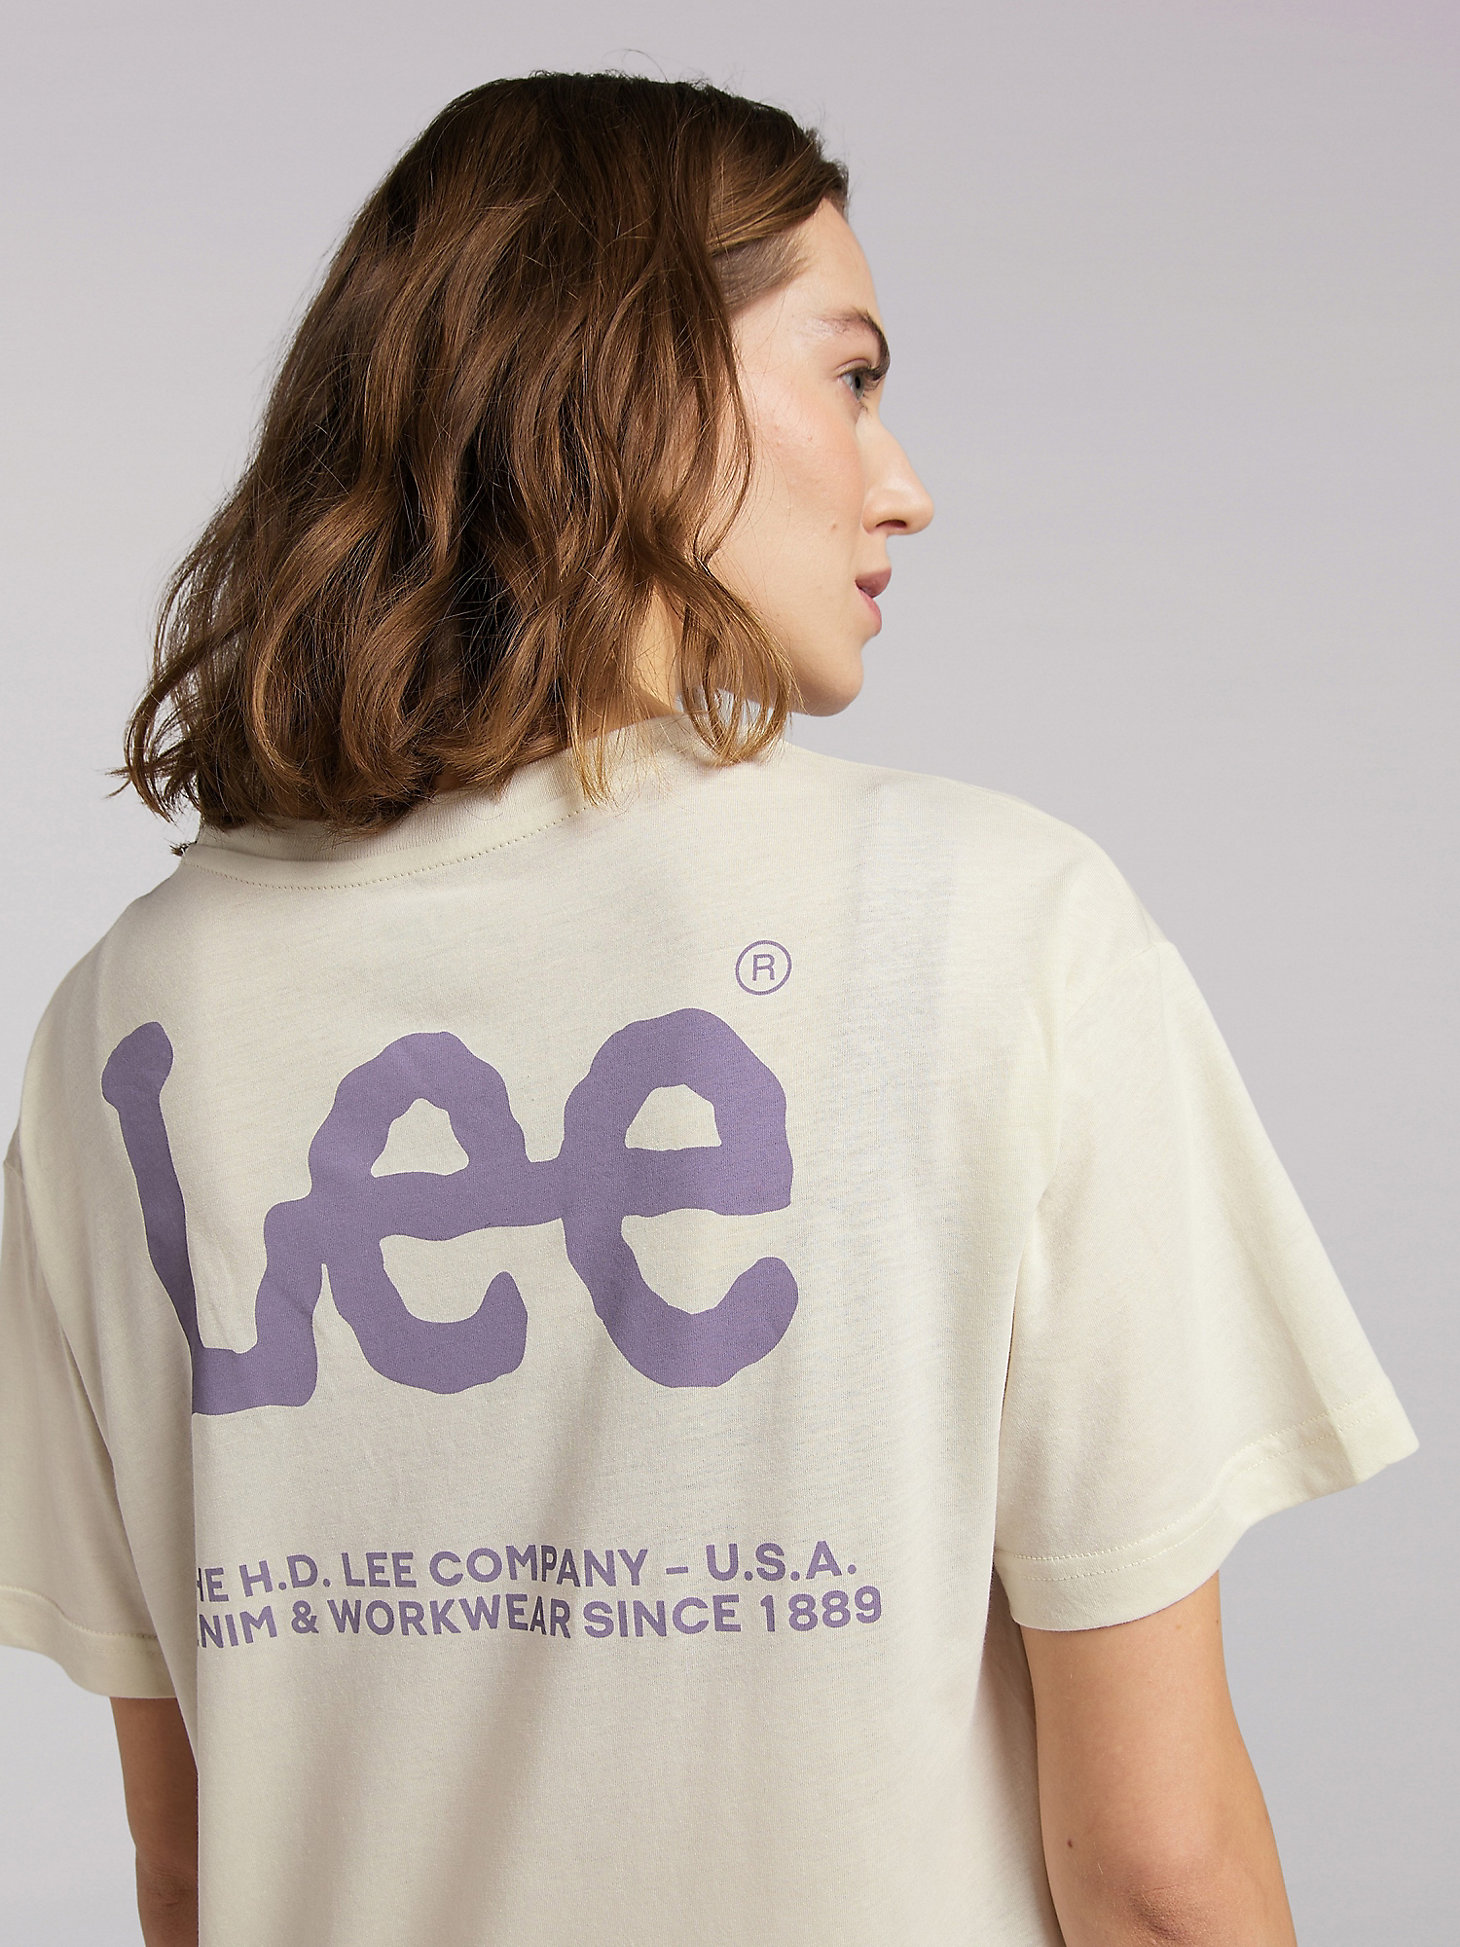 Women's Lee European Collection Relaxed Crew Tee in Workwear White alternative view 3